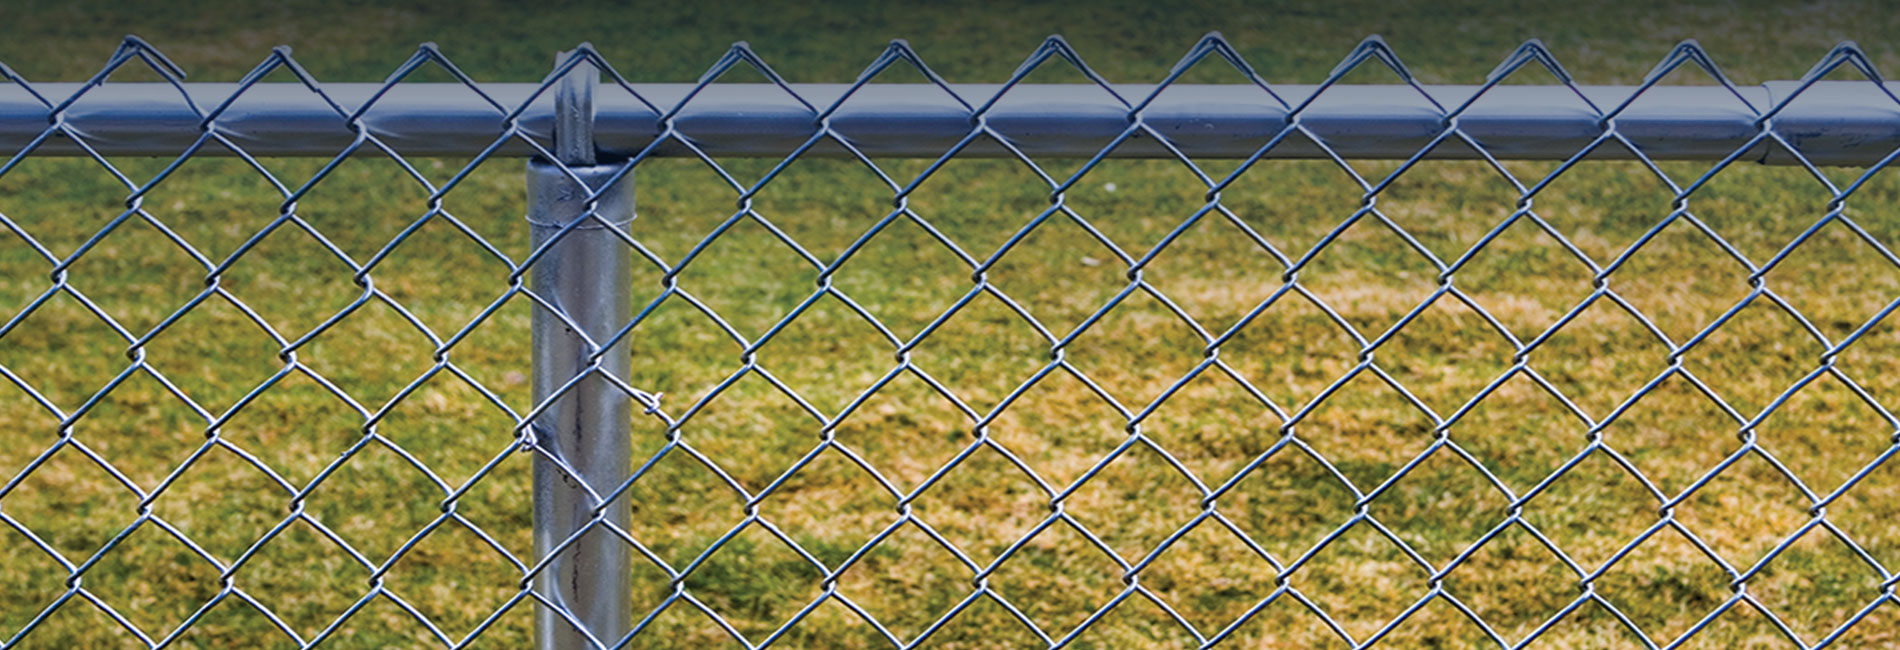 Galvanized Residential Tube with chain link fence